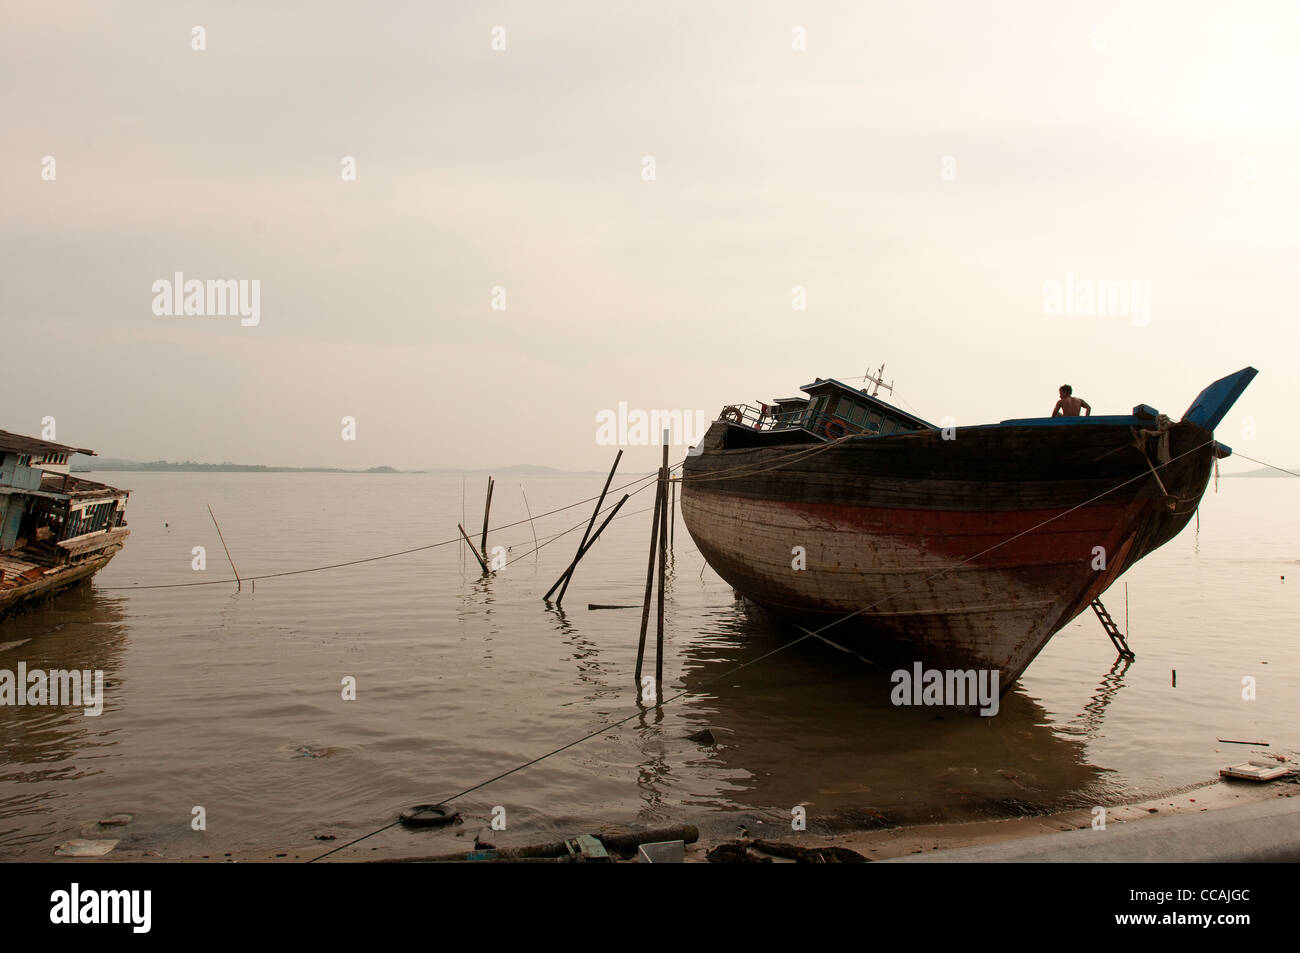 A boat during low tide in Karimun Stock Photo